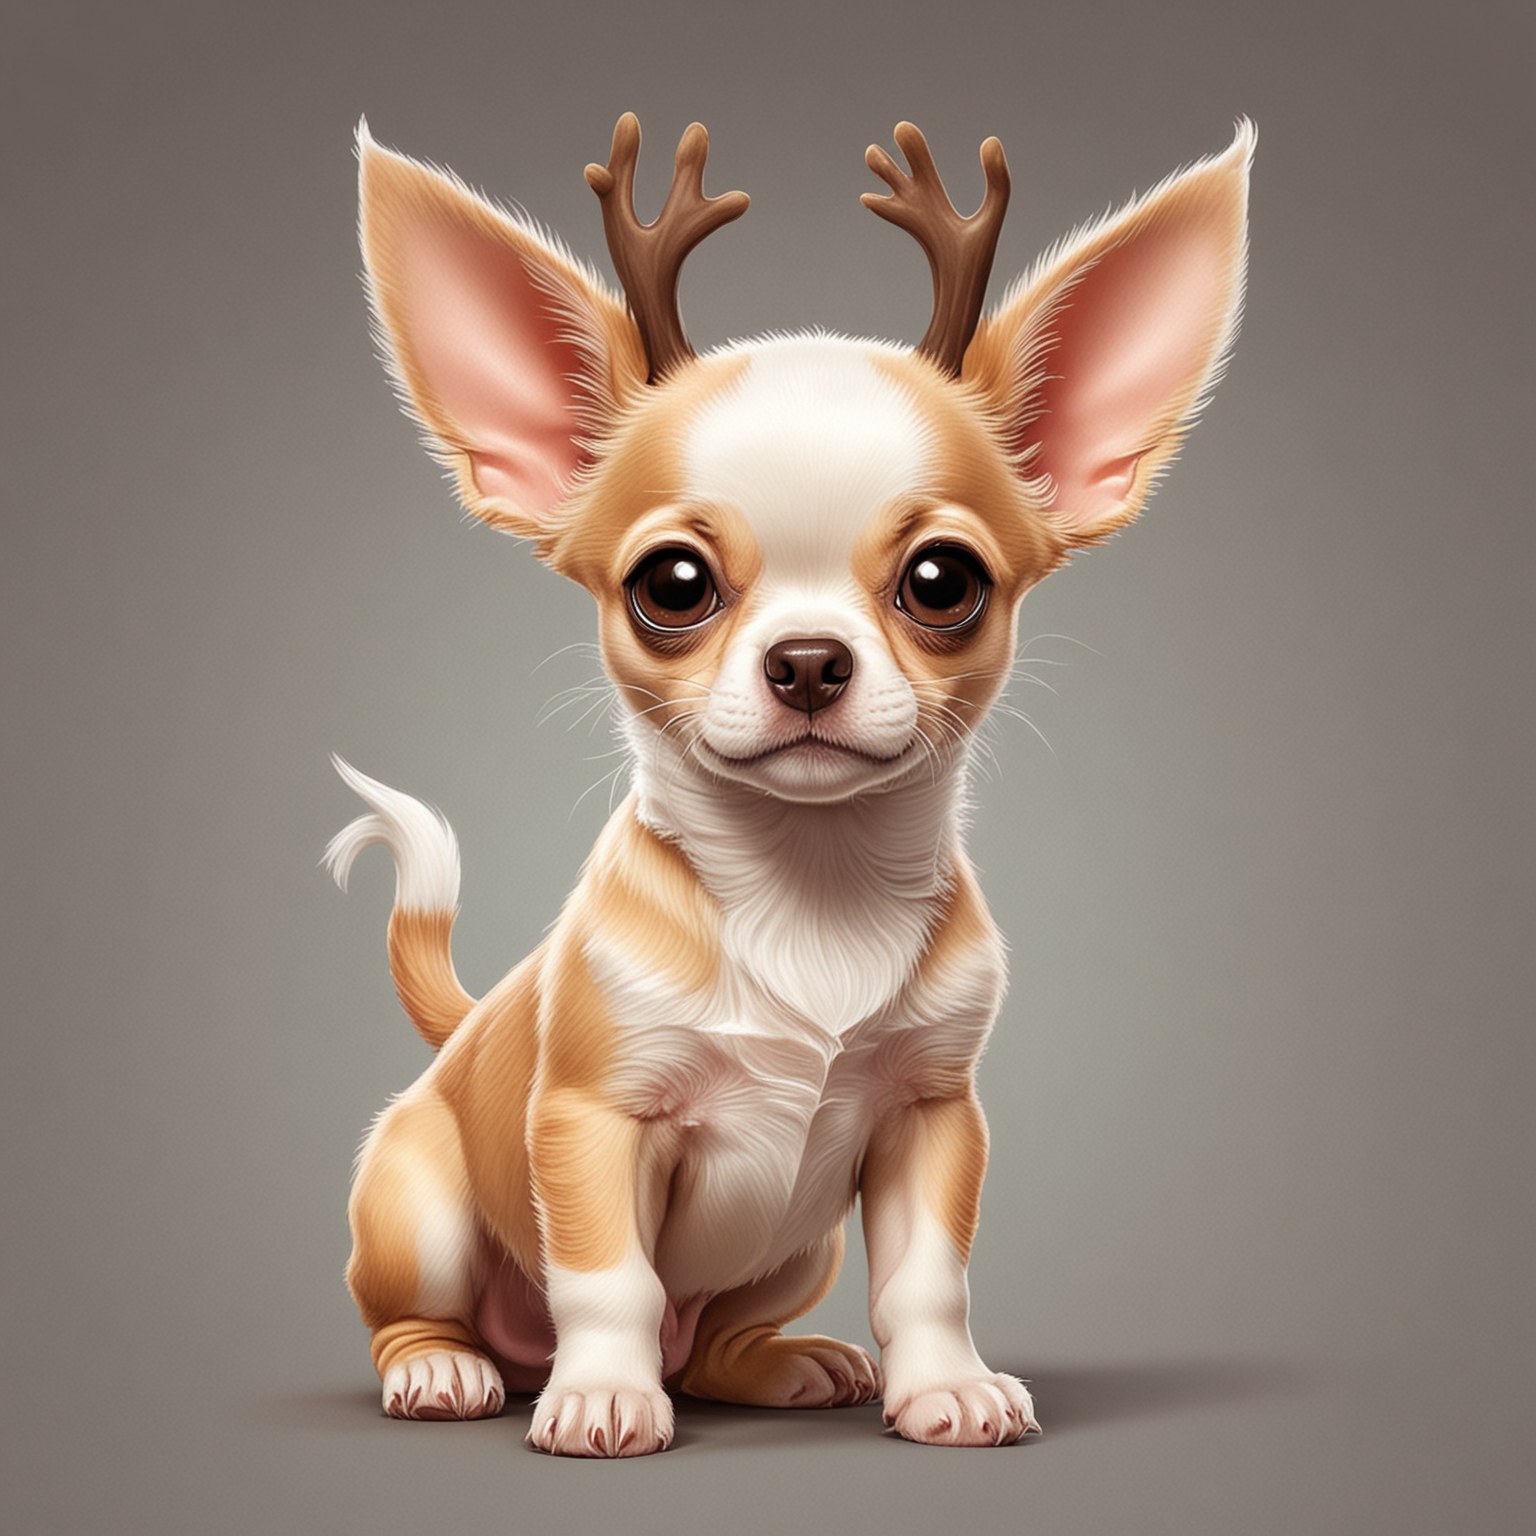 a cartoon chihuahua puppy with deer horns and a white head
